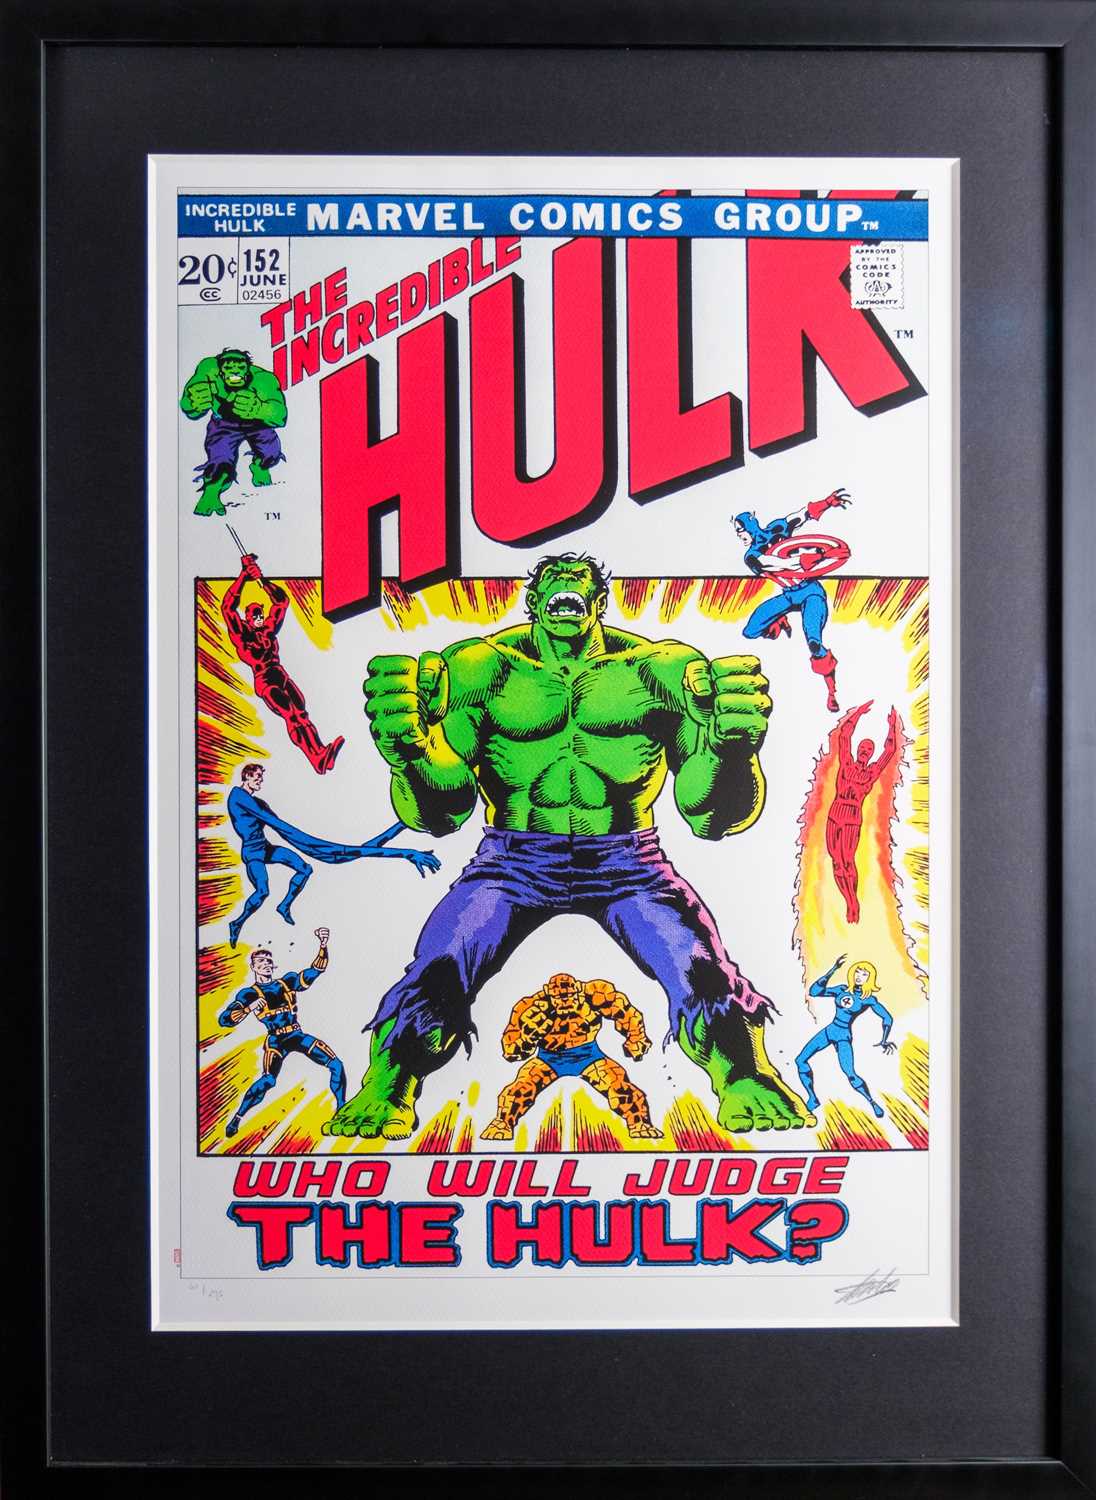 (Signed) Stan LEE (1922-2018) The Incredible Hulk #152 - Who Will Judge The Hulk? (2013) - Image 2 of 5